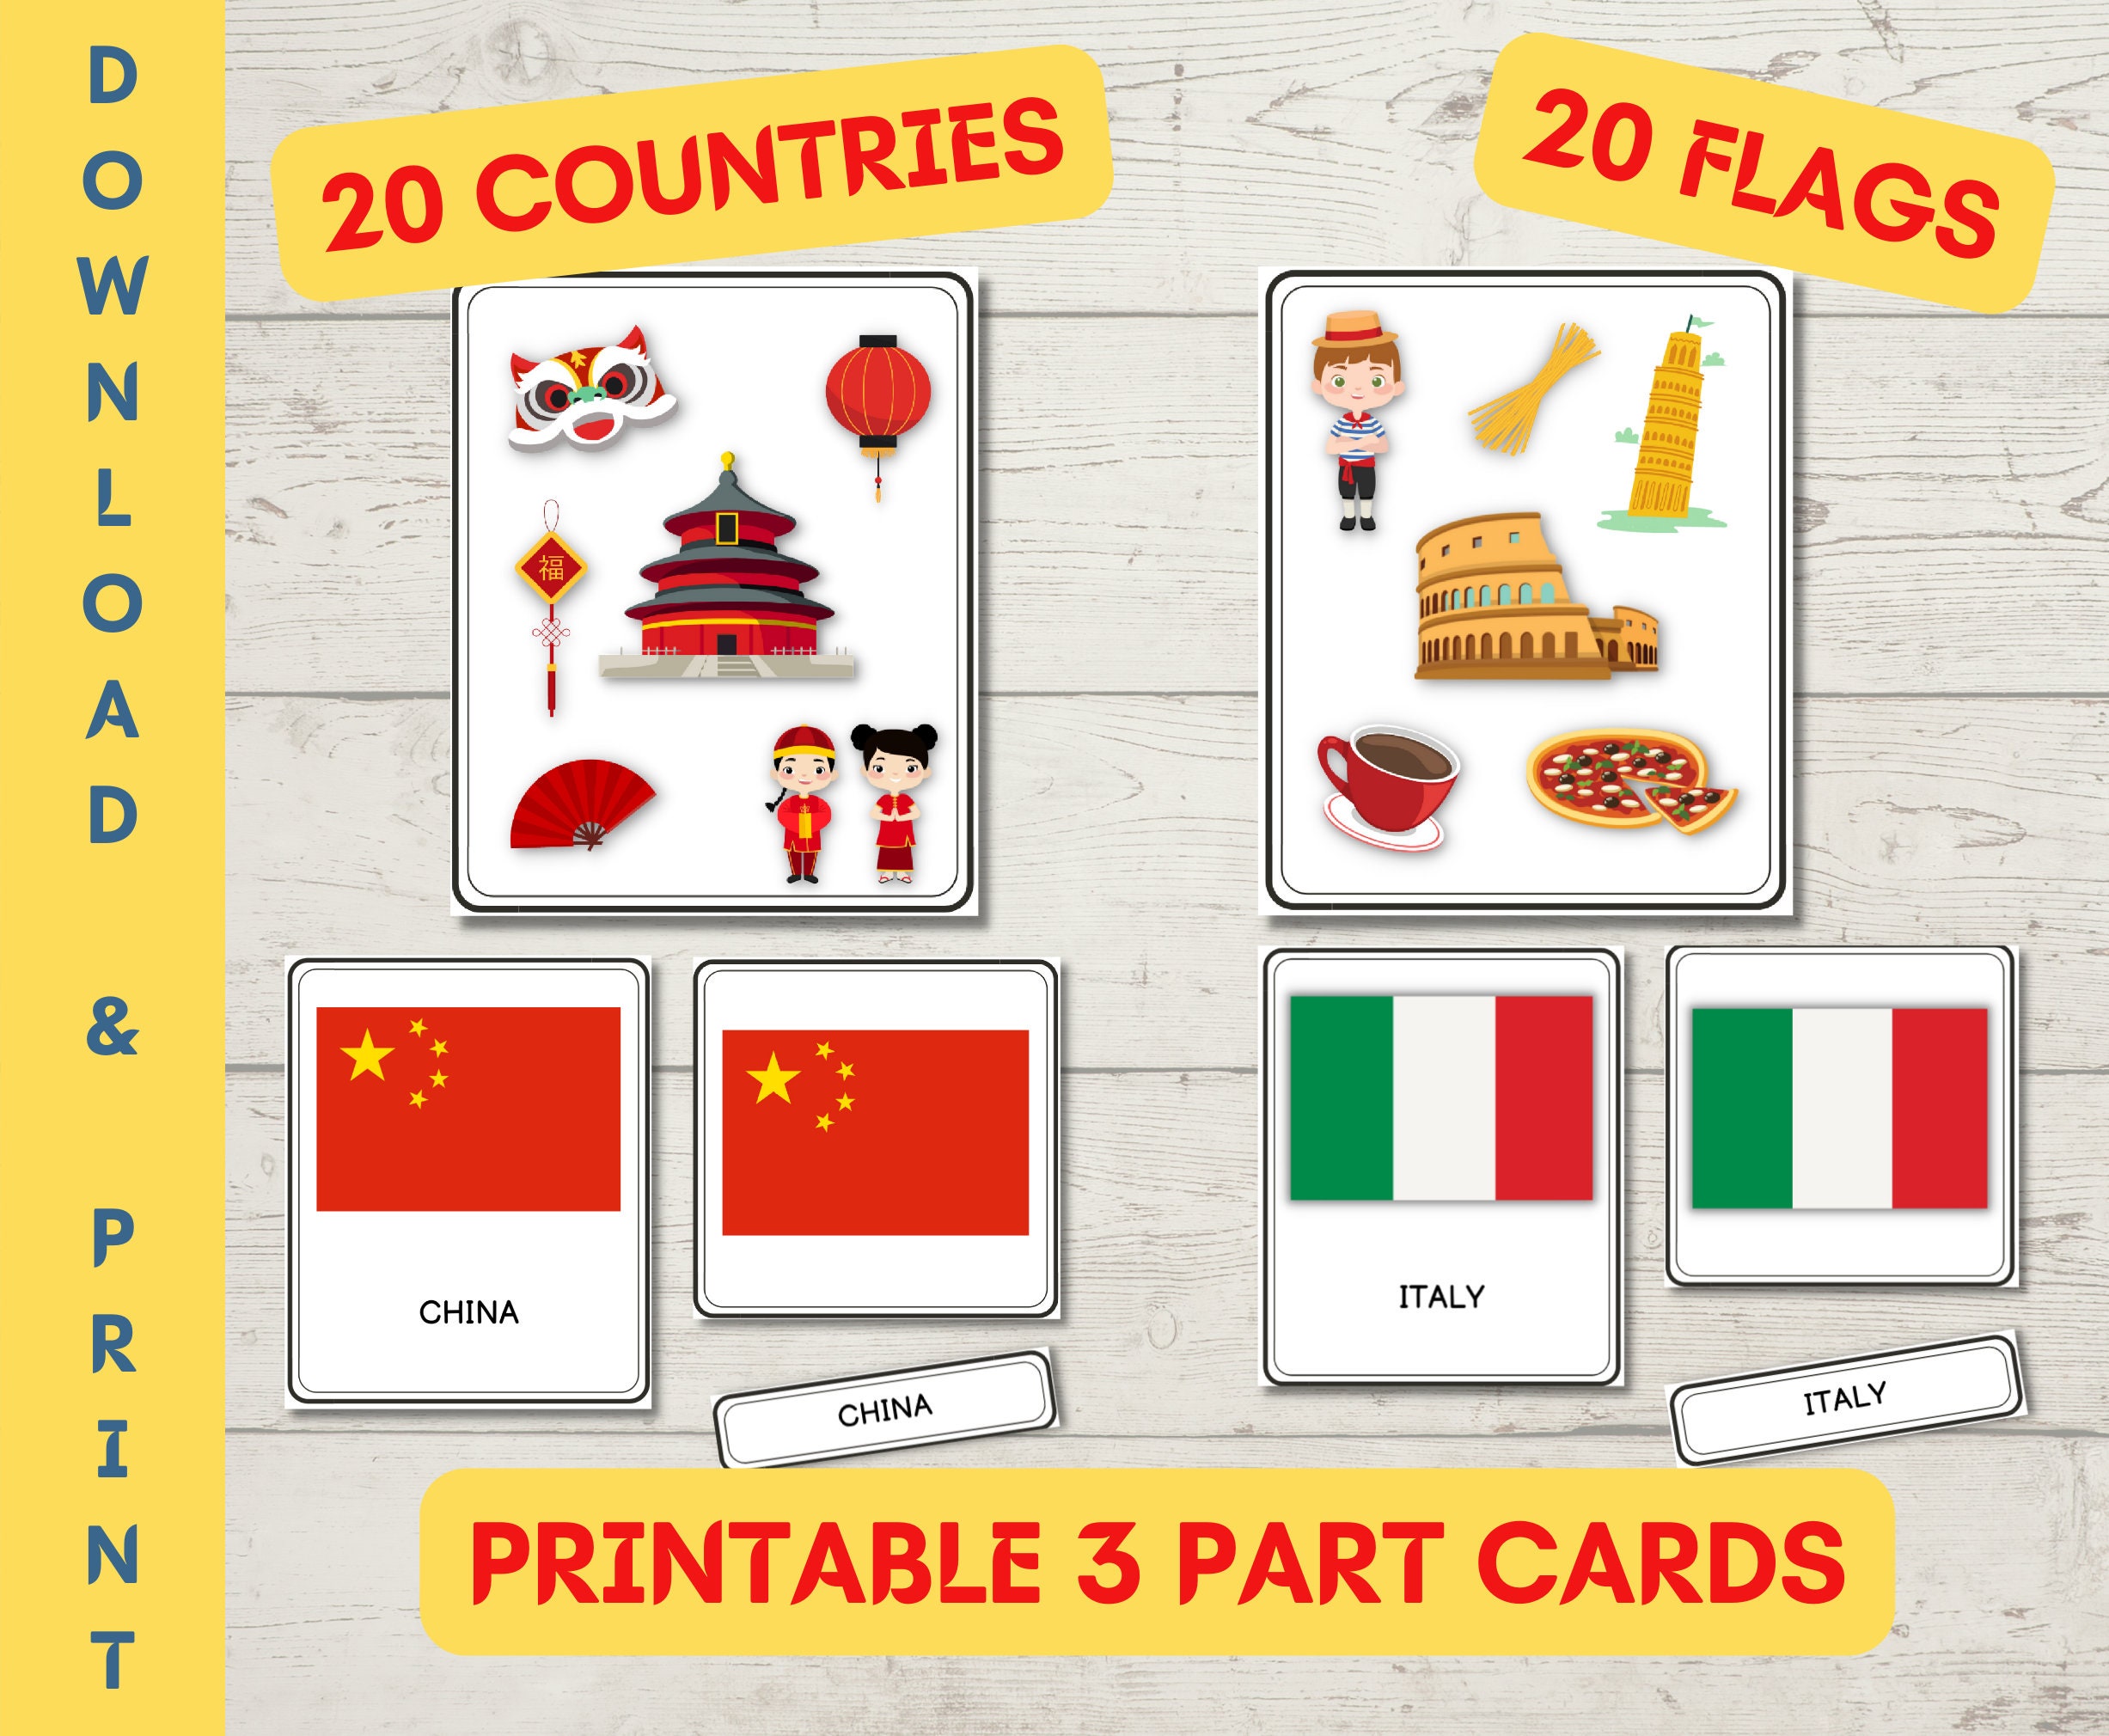 Country Flashcards Norway, 44% OFF